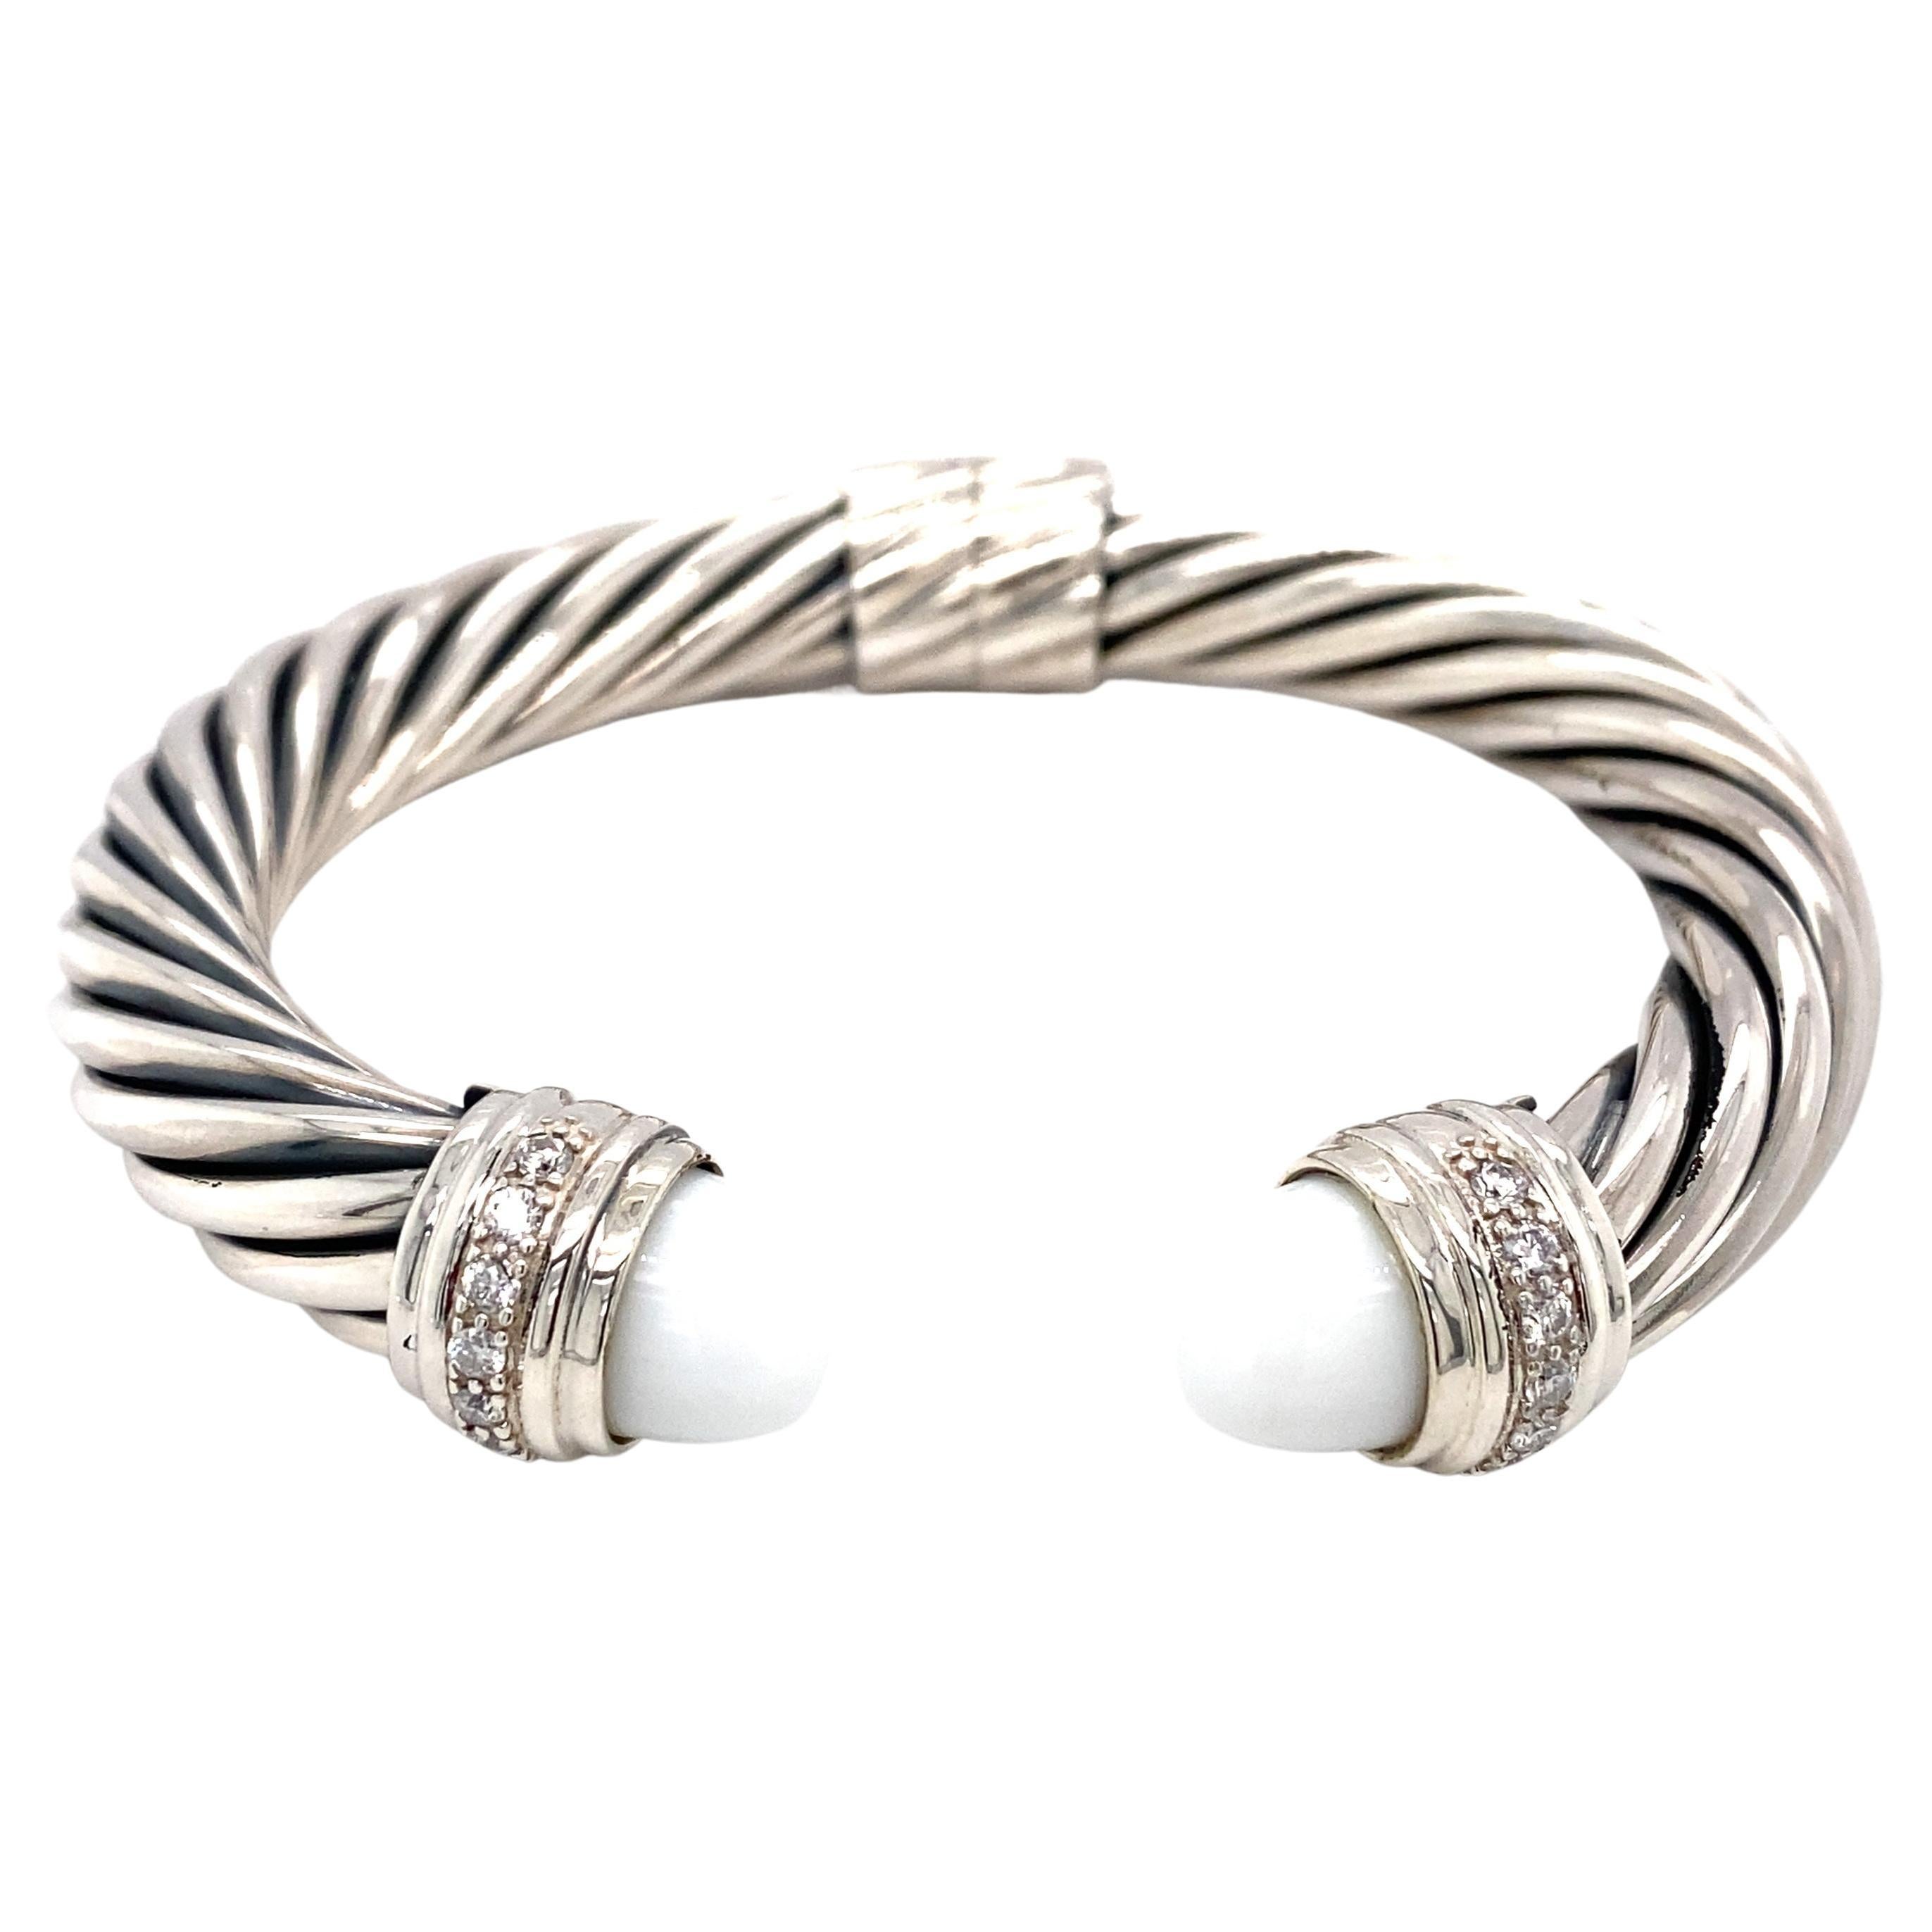 David Yurman Chalcedony and White Sapphire Hinged Cuff in Sterling Silver